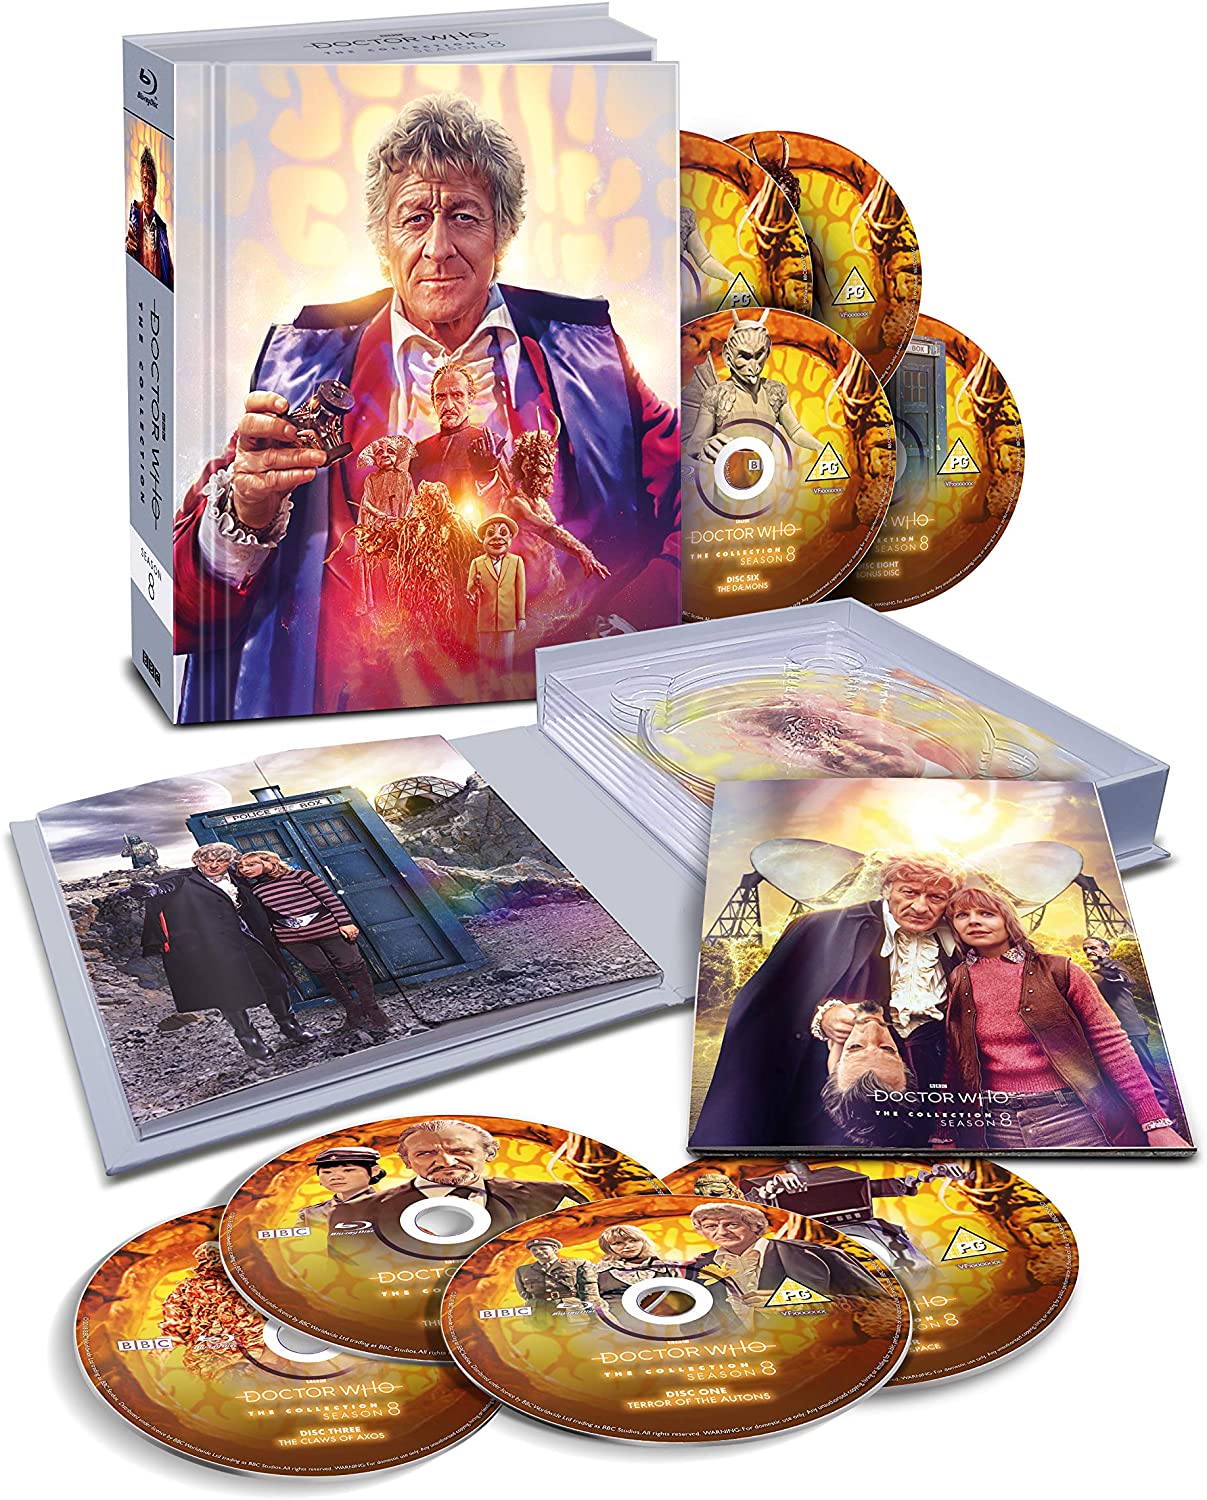 CLASSIC 'DOCTOR WHO' BLU-RAY - EARLY 2021